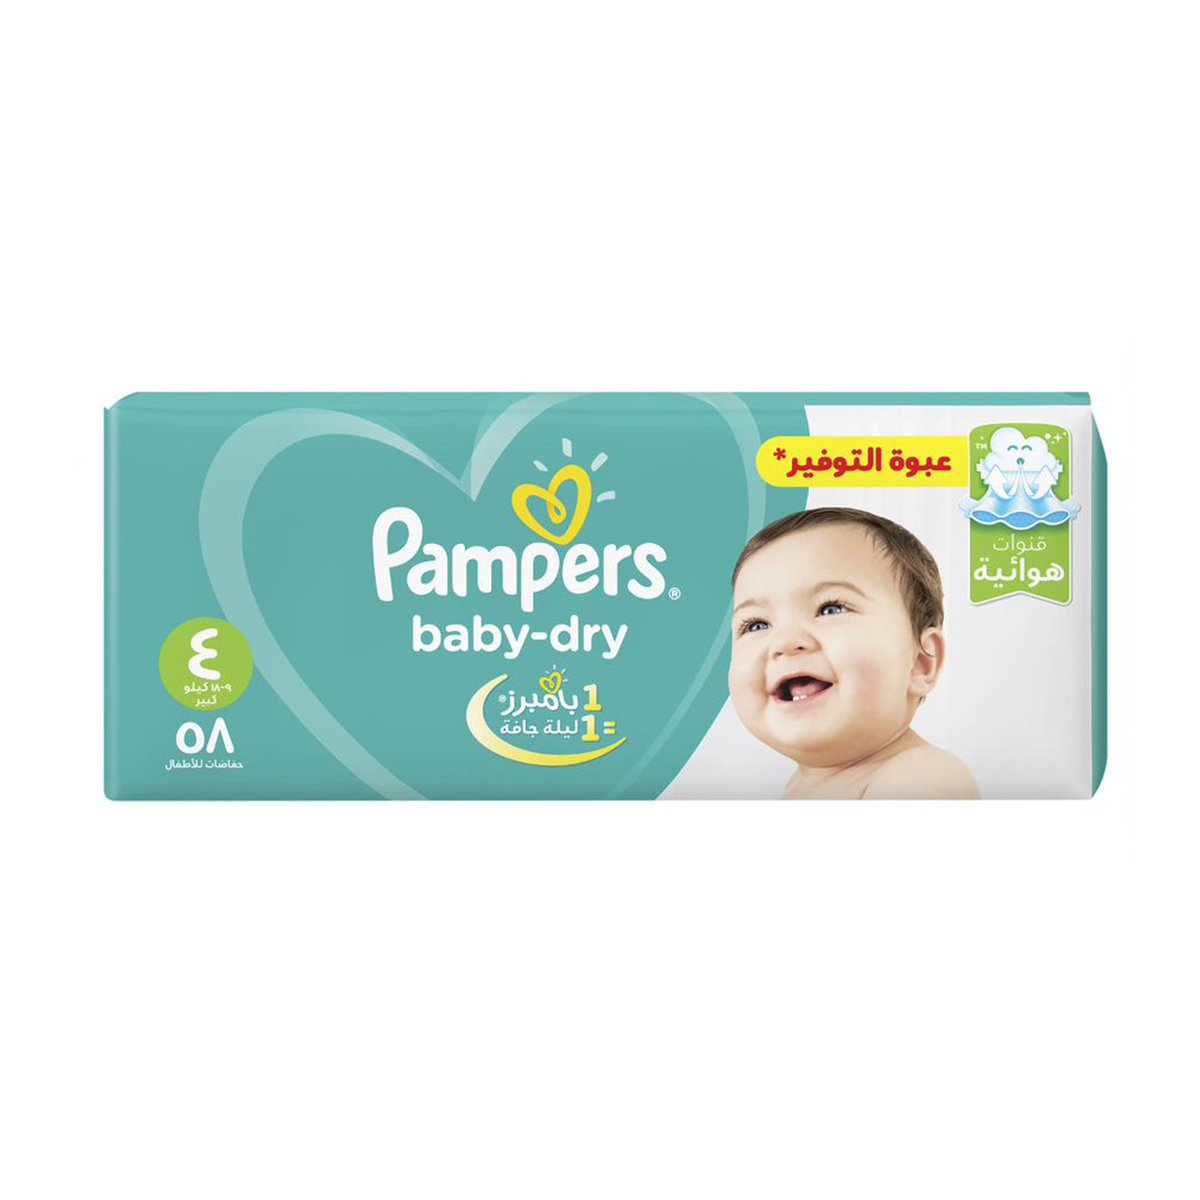 Vertrouwen professioneel Vet Pampers Baby Dry Diaper Size 4 Maxi 9-18kg 58pcs Online at Best Price |  Baby Nappies | Lulu Egypt